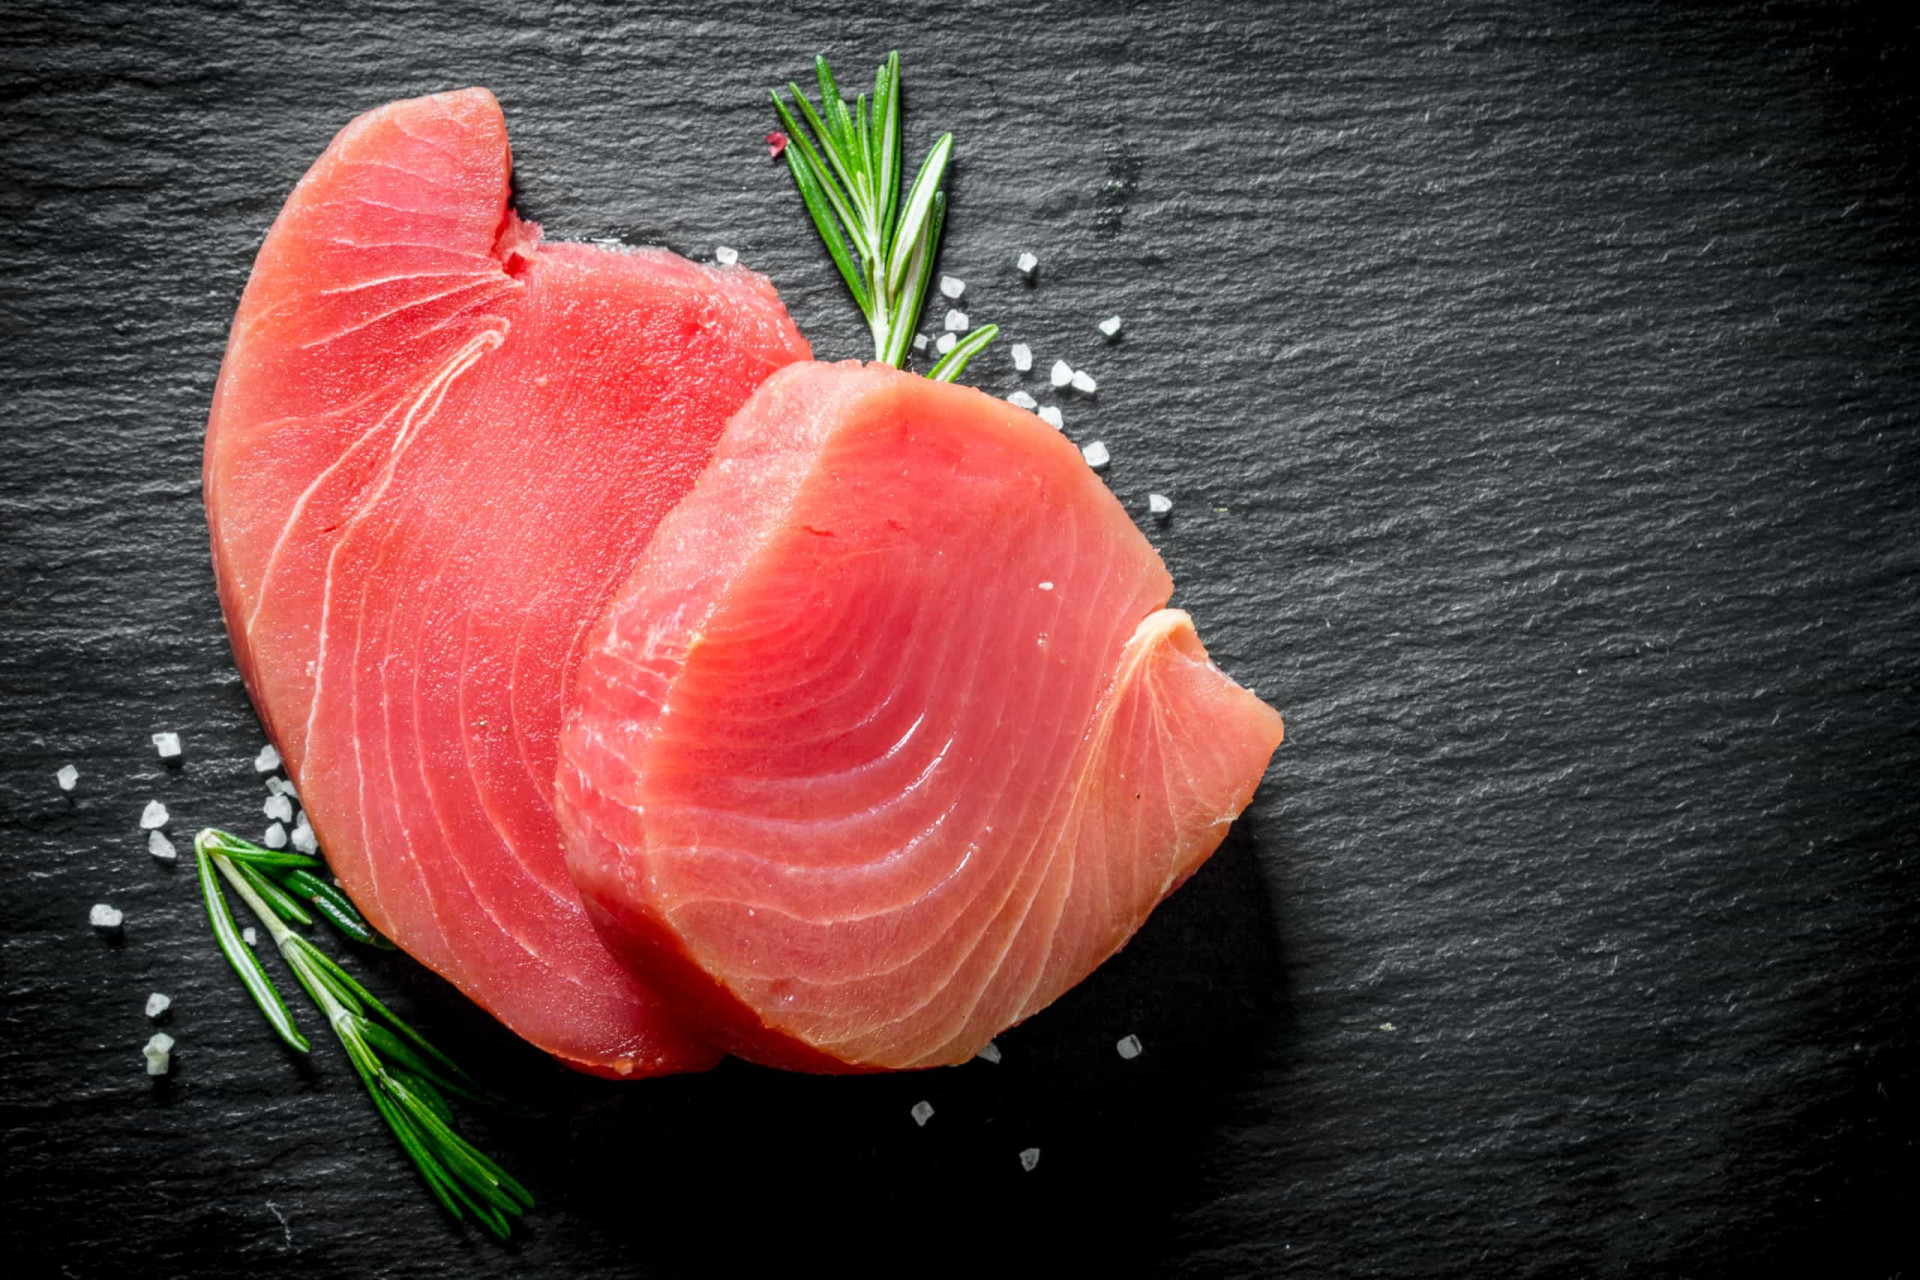 <p>According to Scientific American, certain types of fish like bluefish, shark, swordfish, wild sturgeon, opah (sunfish), and bigeye tuna are known to have a higher mercury content. This is due to their size and their ability to absorb methylmercury from their diet and water through their gills.</p><p>You may also like:<a href="https://www.starsinsider.com/n/334662?utm_source=msn.com&utm_medium=display&utm_campaign=referral_description&utm_content=578219en-en"> Conflicts that led these celebs to dump projects</a></p>